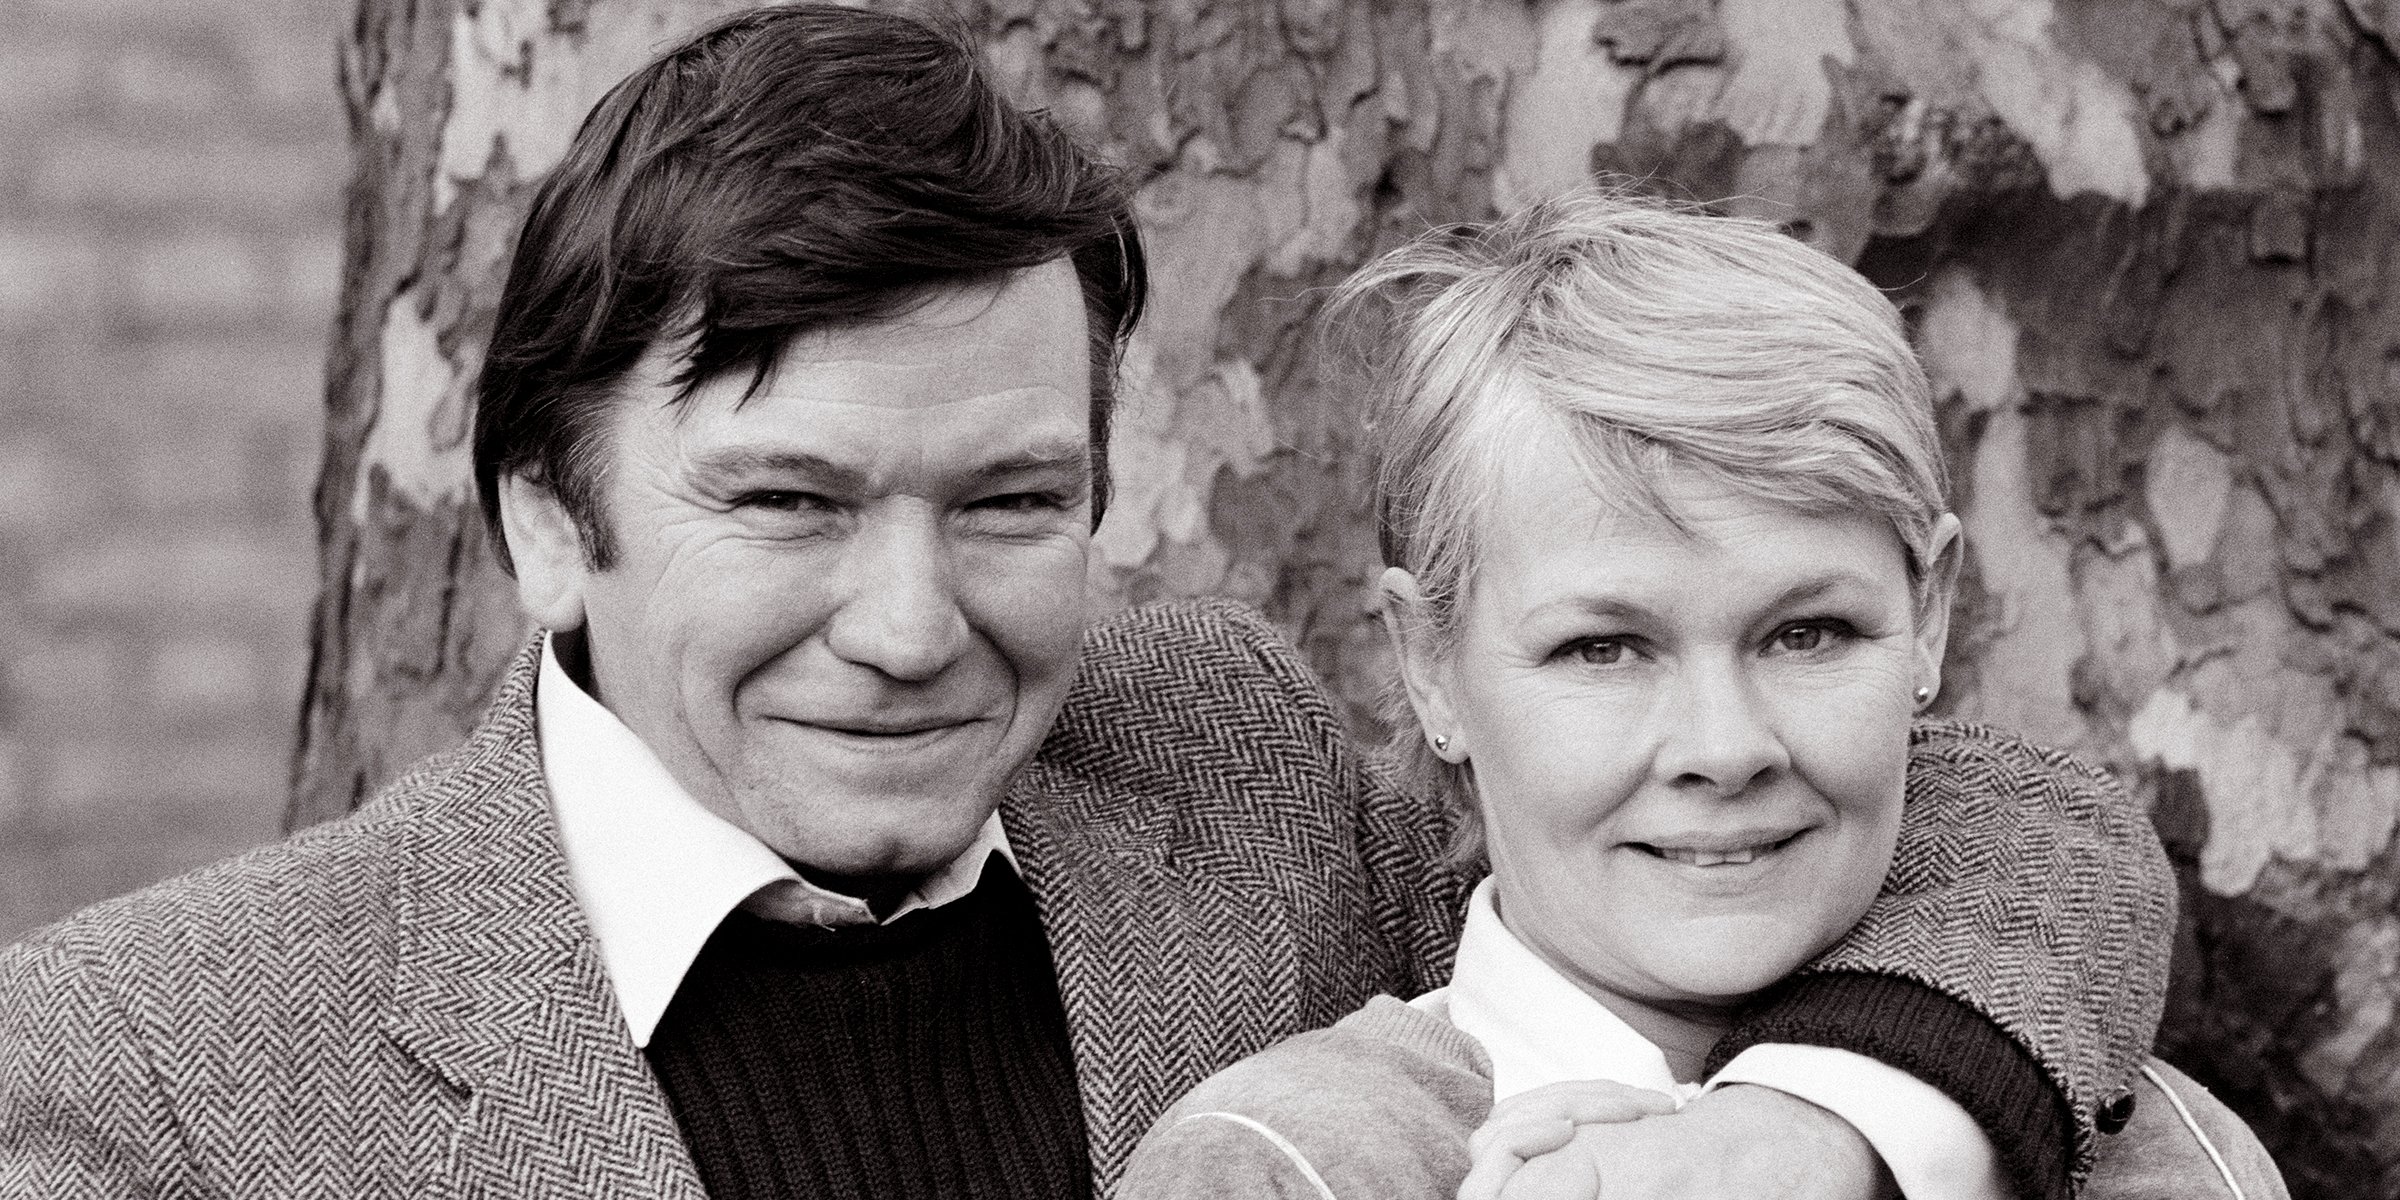 Michael Williams and Judi Dench, 1983 | Source: Getty Images